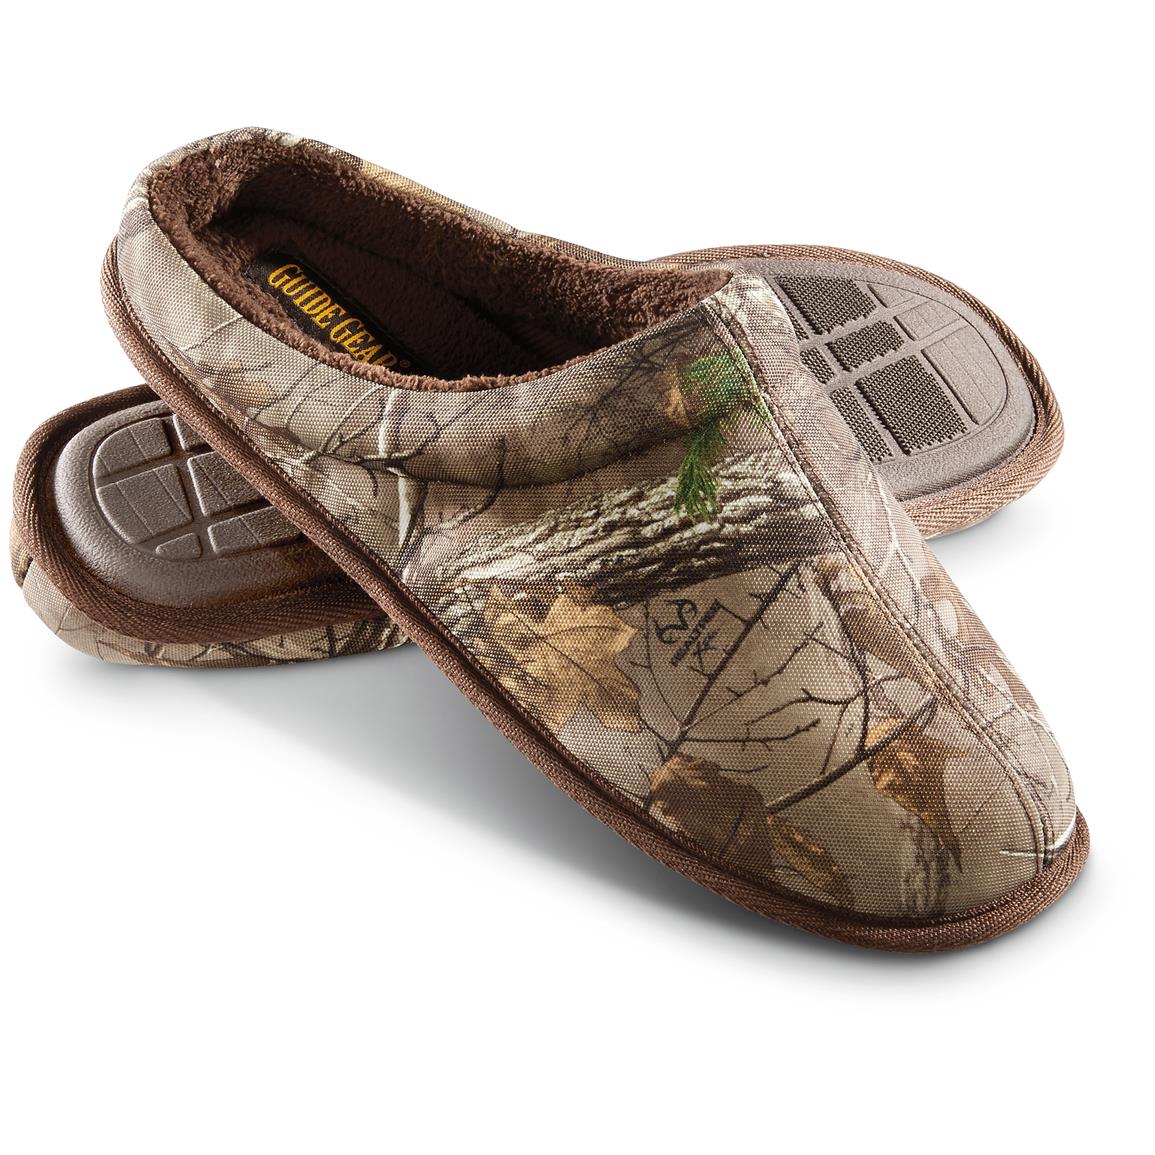 Guide Gear Men's Camo Clog Slippers, Realtree Xtra - 624261, Slippers ...